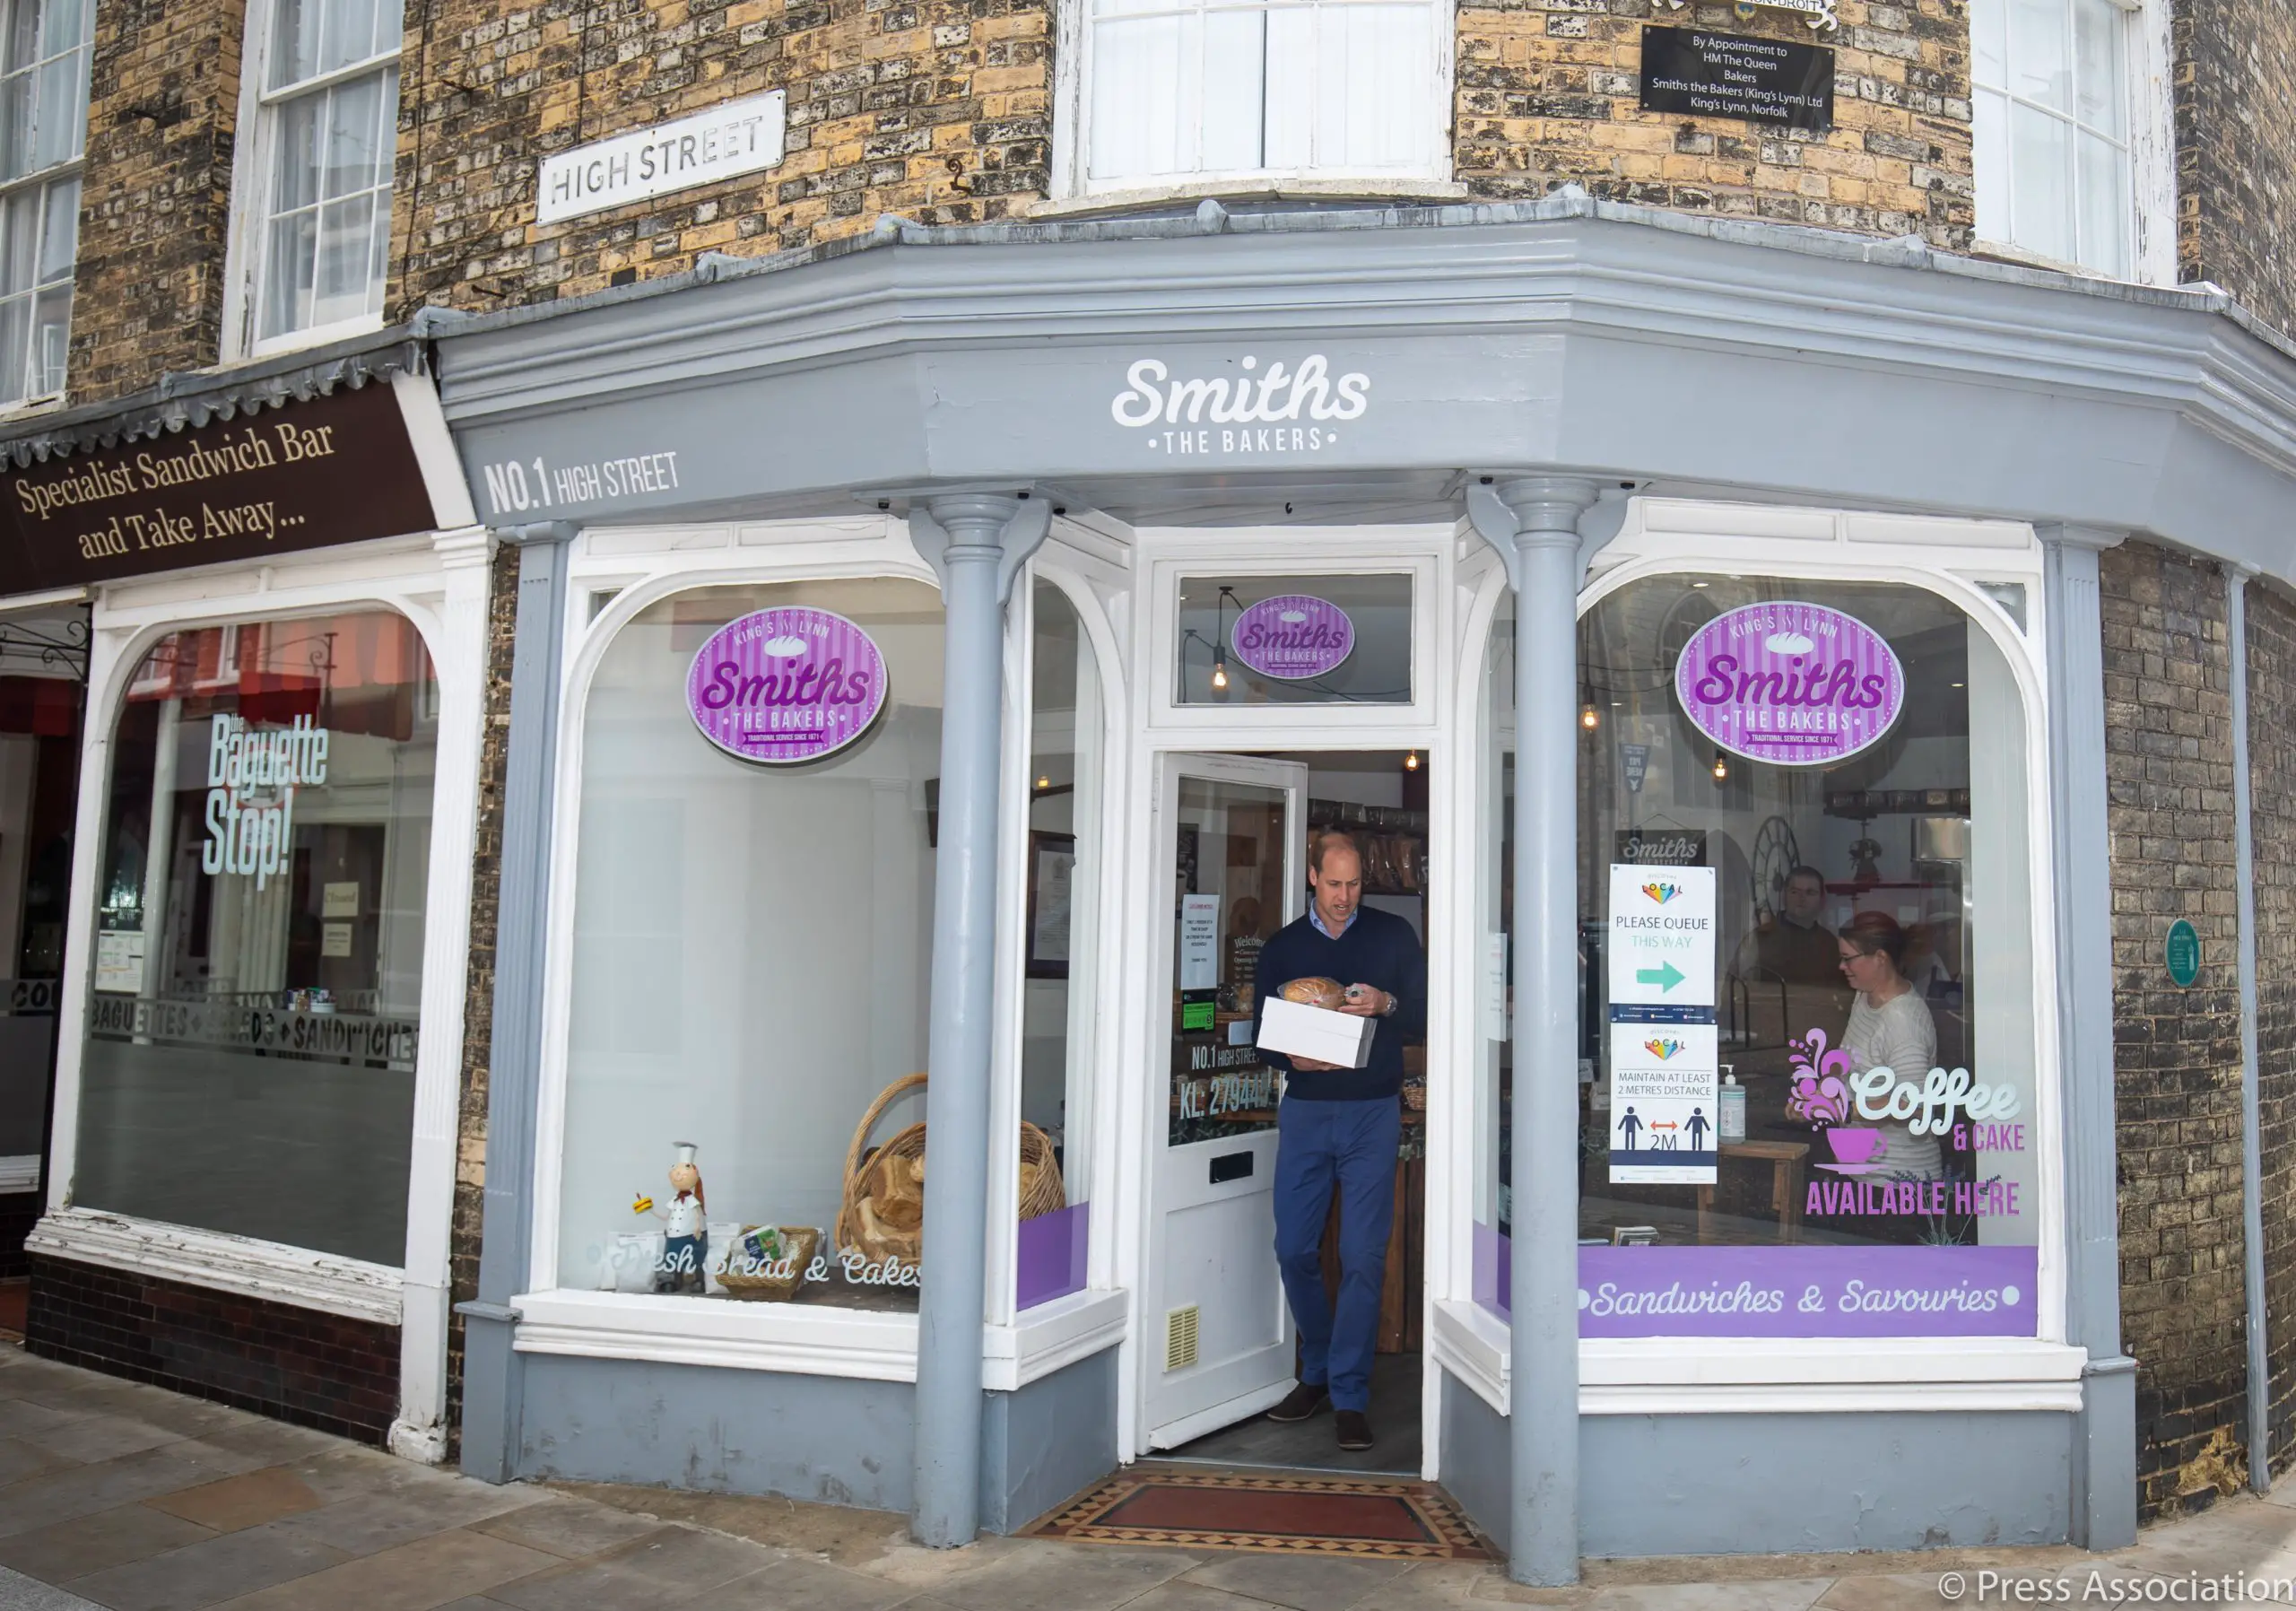 The Duke of Cambridge visited Smiths the Bakers